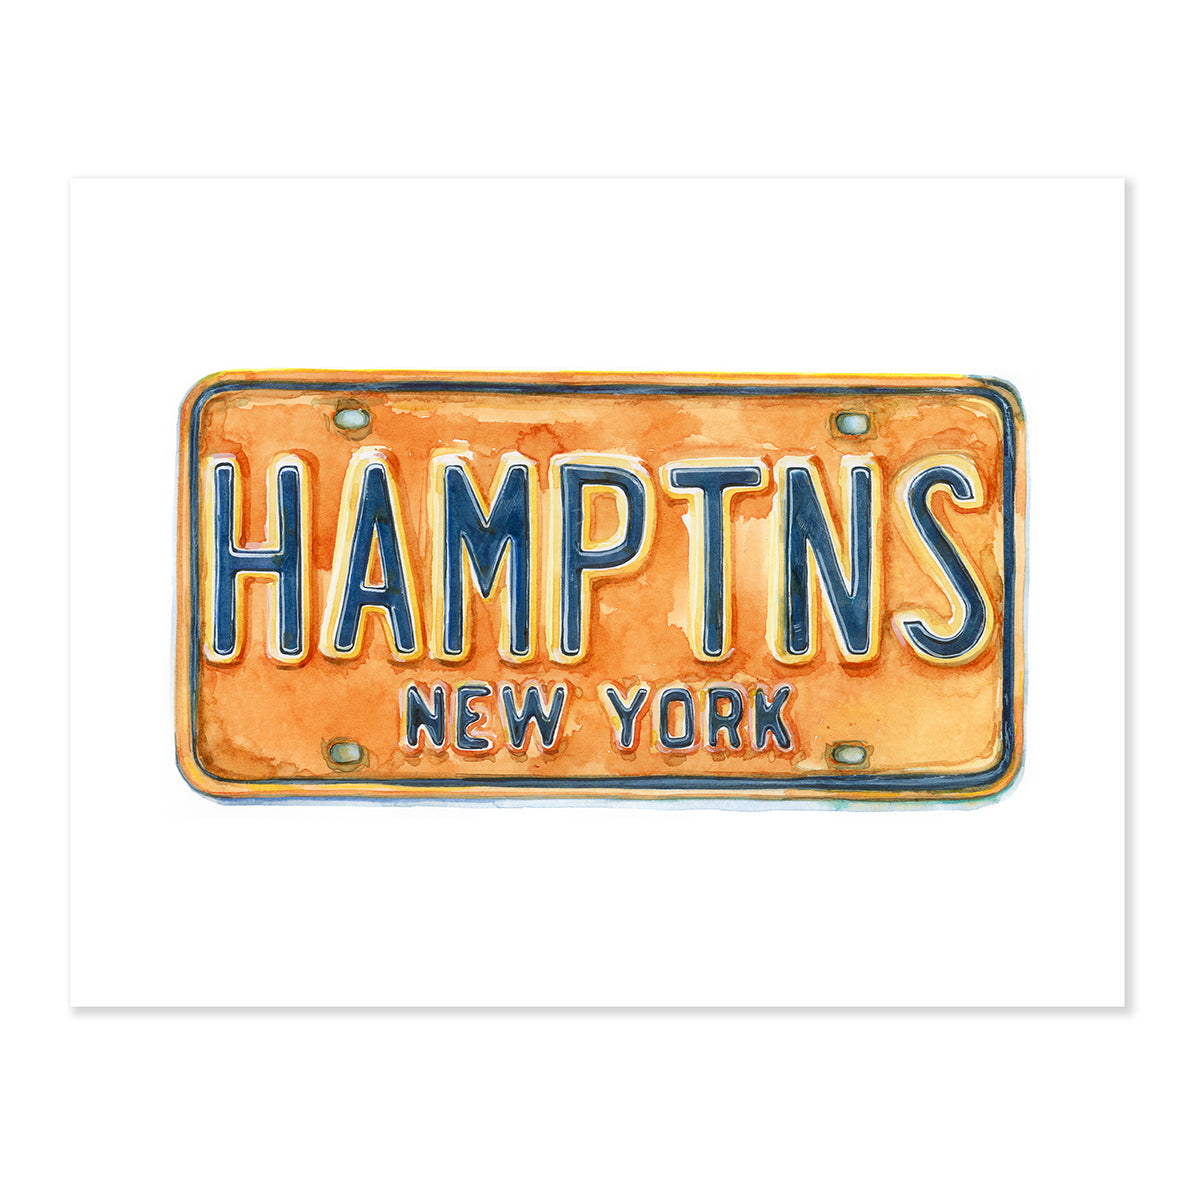 A fine art illustrating a golden yellow New York license plate thats reads Hamptns in deep blue letter painted with watercolors on a soft white background